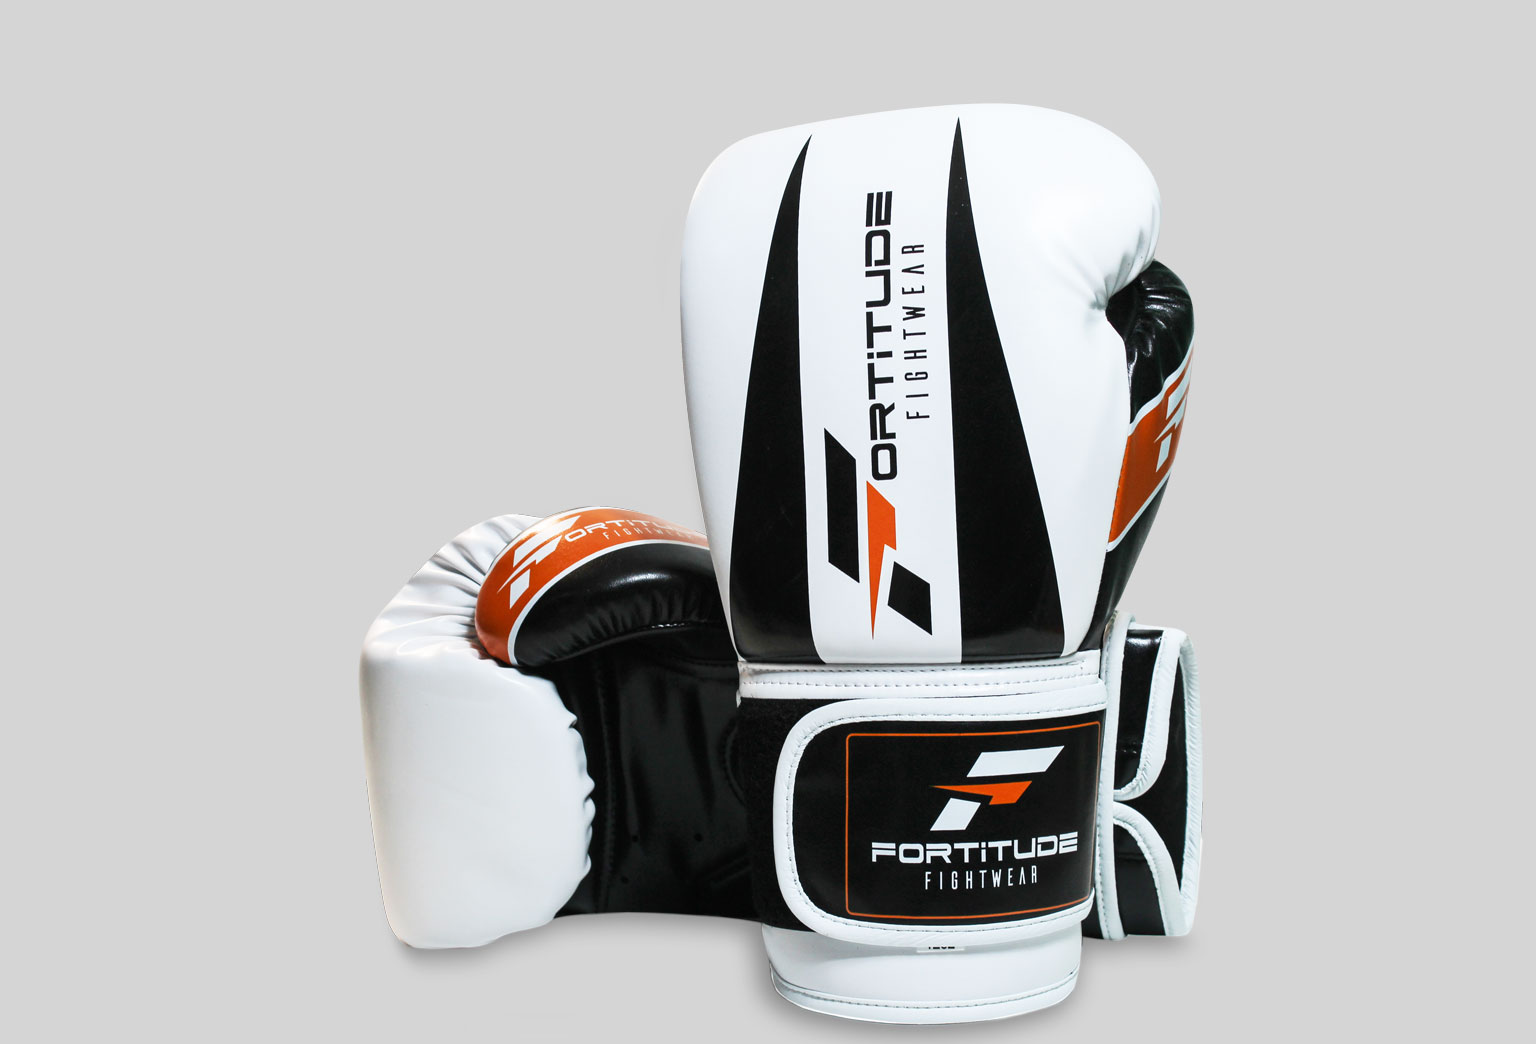 Fortitude Fightwear Boxing Gloves